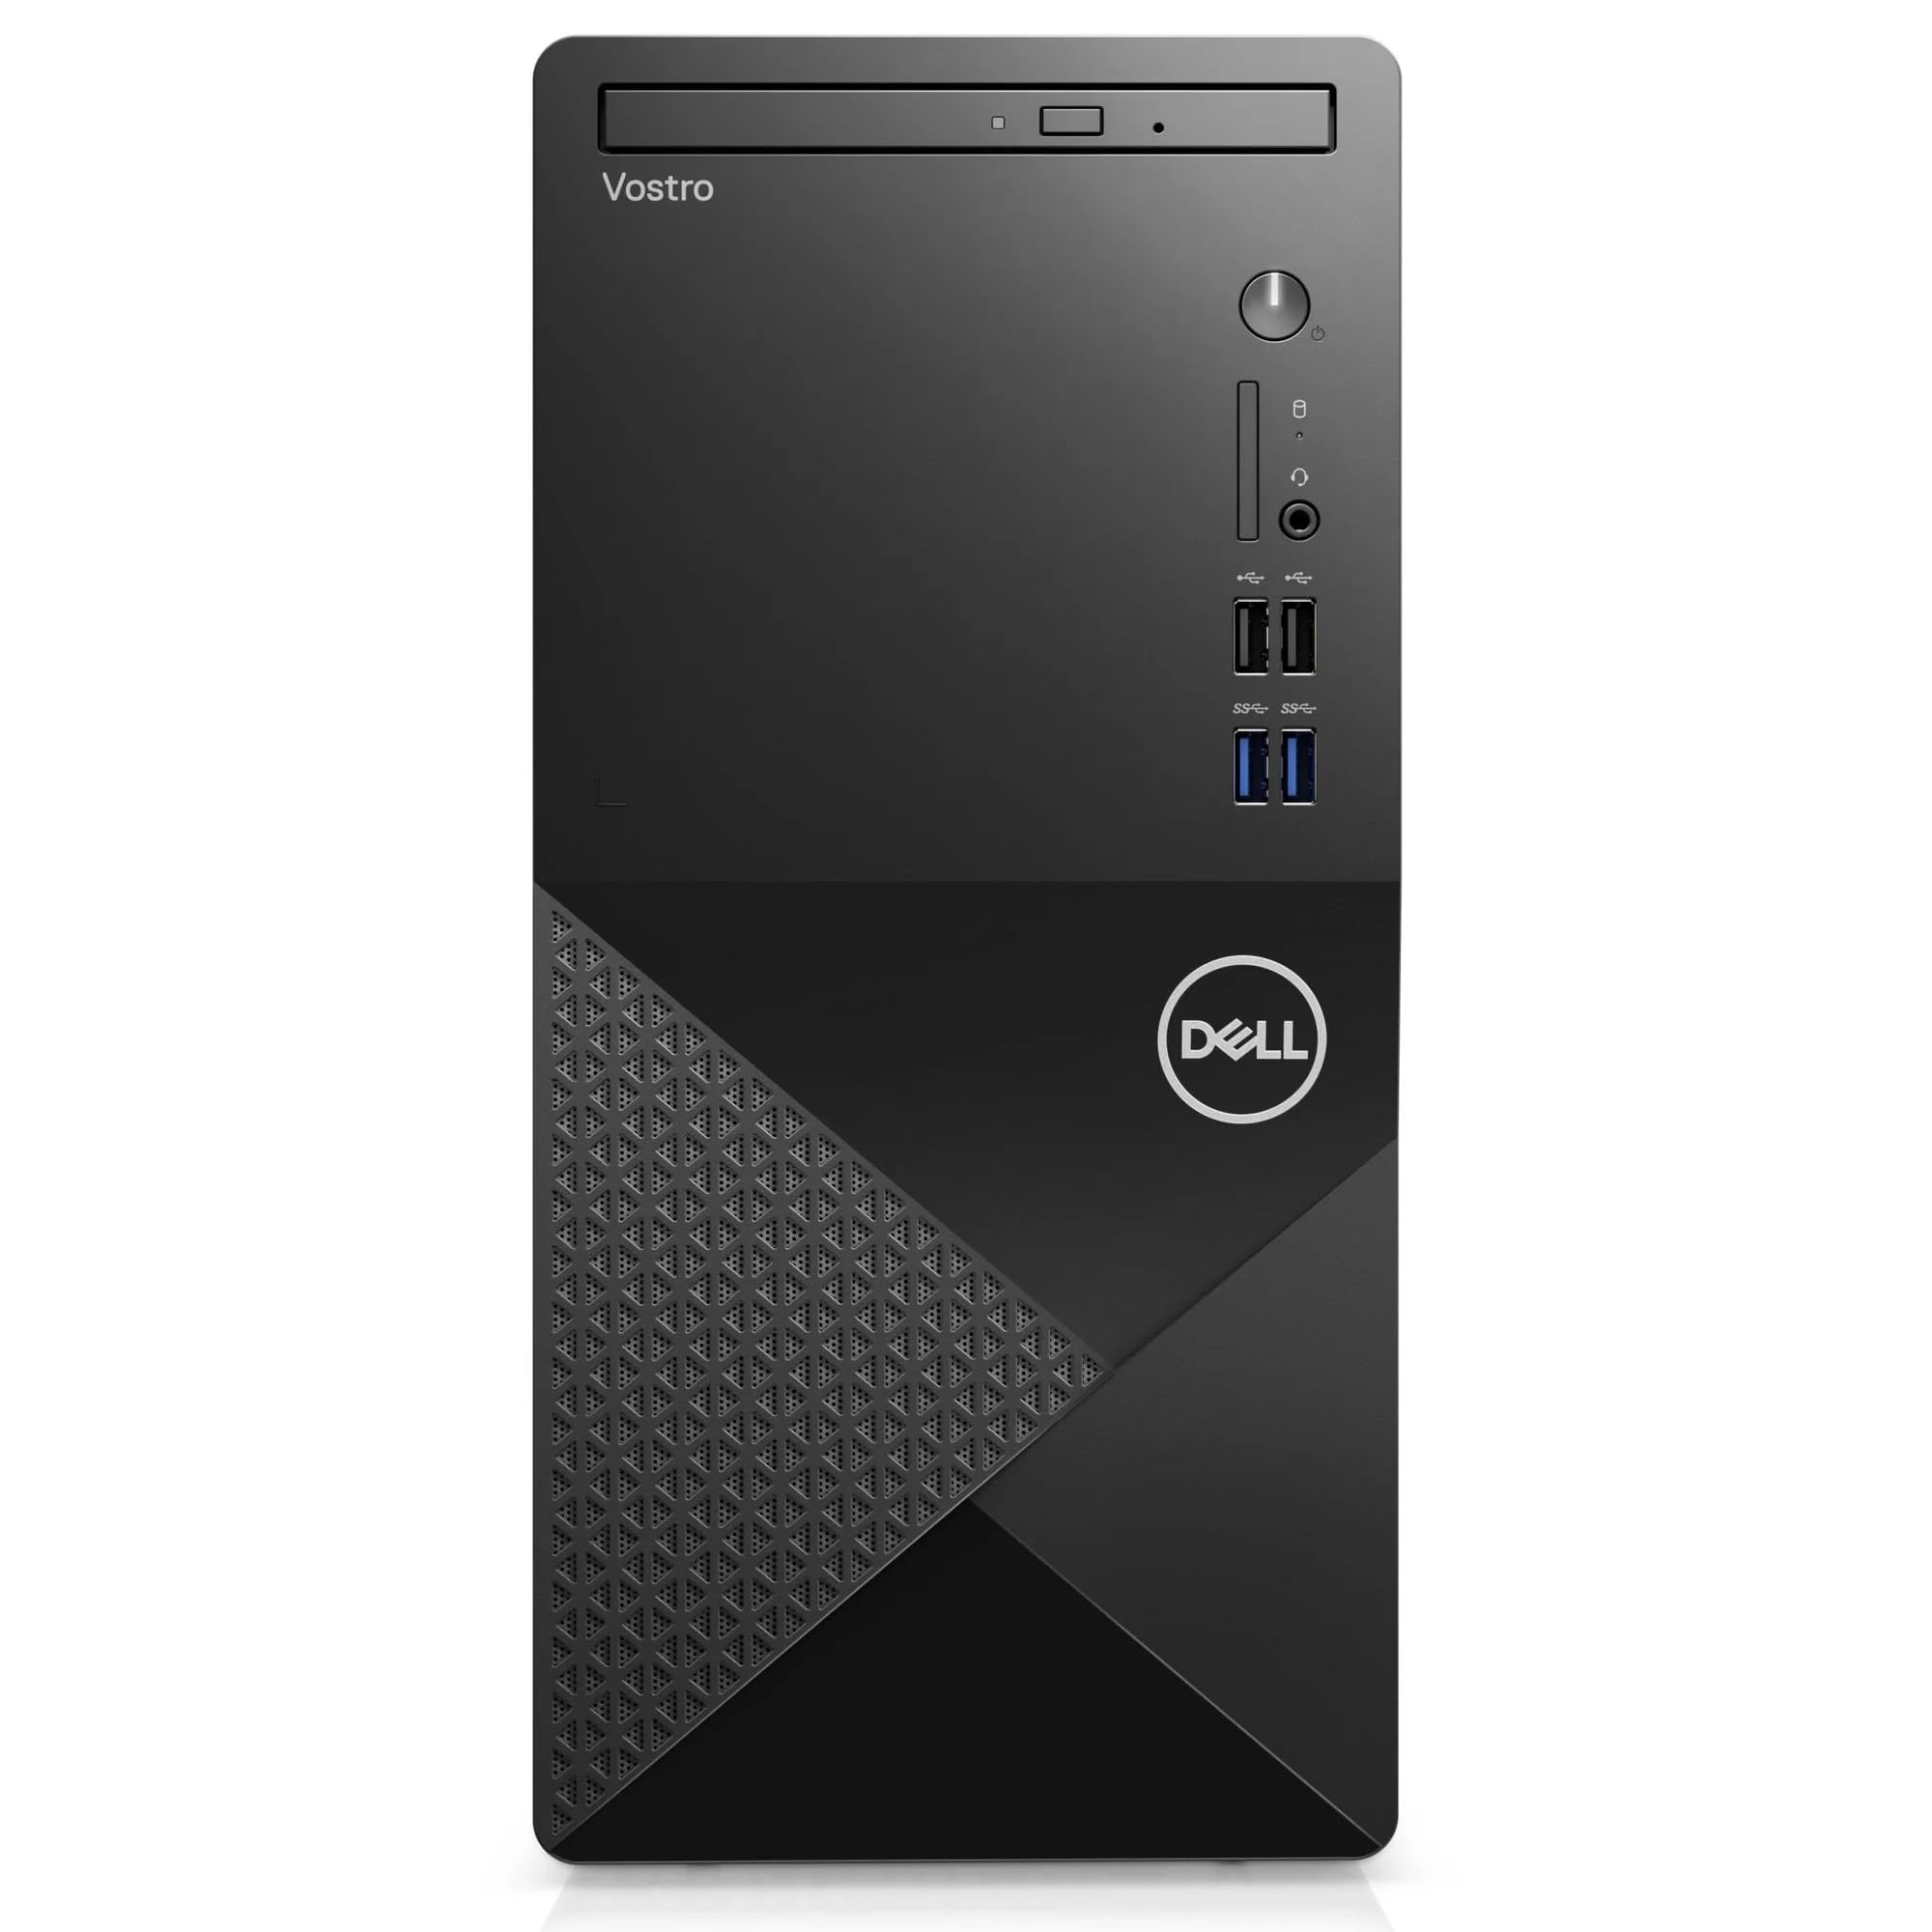 Dell 2023 Vostro 3910 Business Tower Desktop, 12th Gen Intel 12-Core i7-12700 up to 4.9GHz, 32GB DDR4 RAM, 2TB PCIe SSD, DVDRW, 802.11AC WiFi, Bluetooth 5, Keyboard & Mouse, Windows 11 Pro